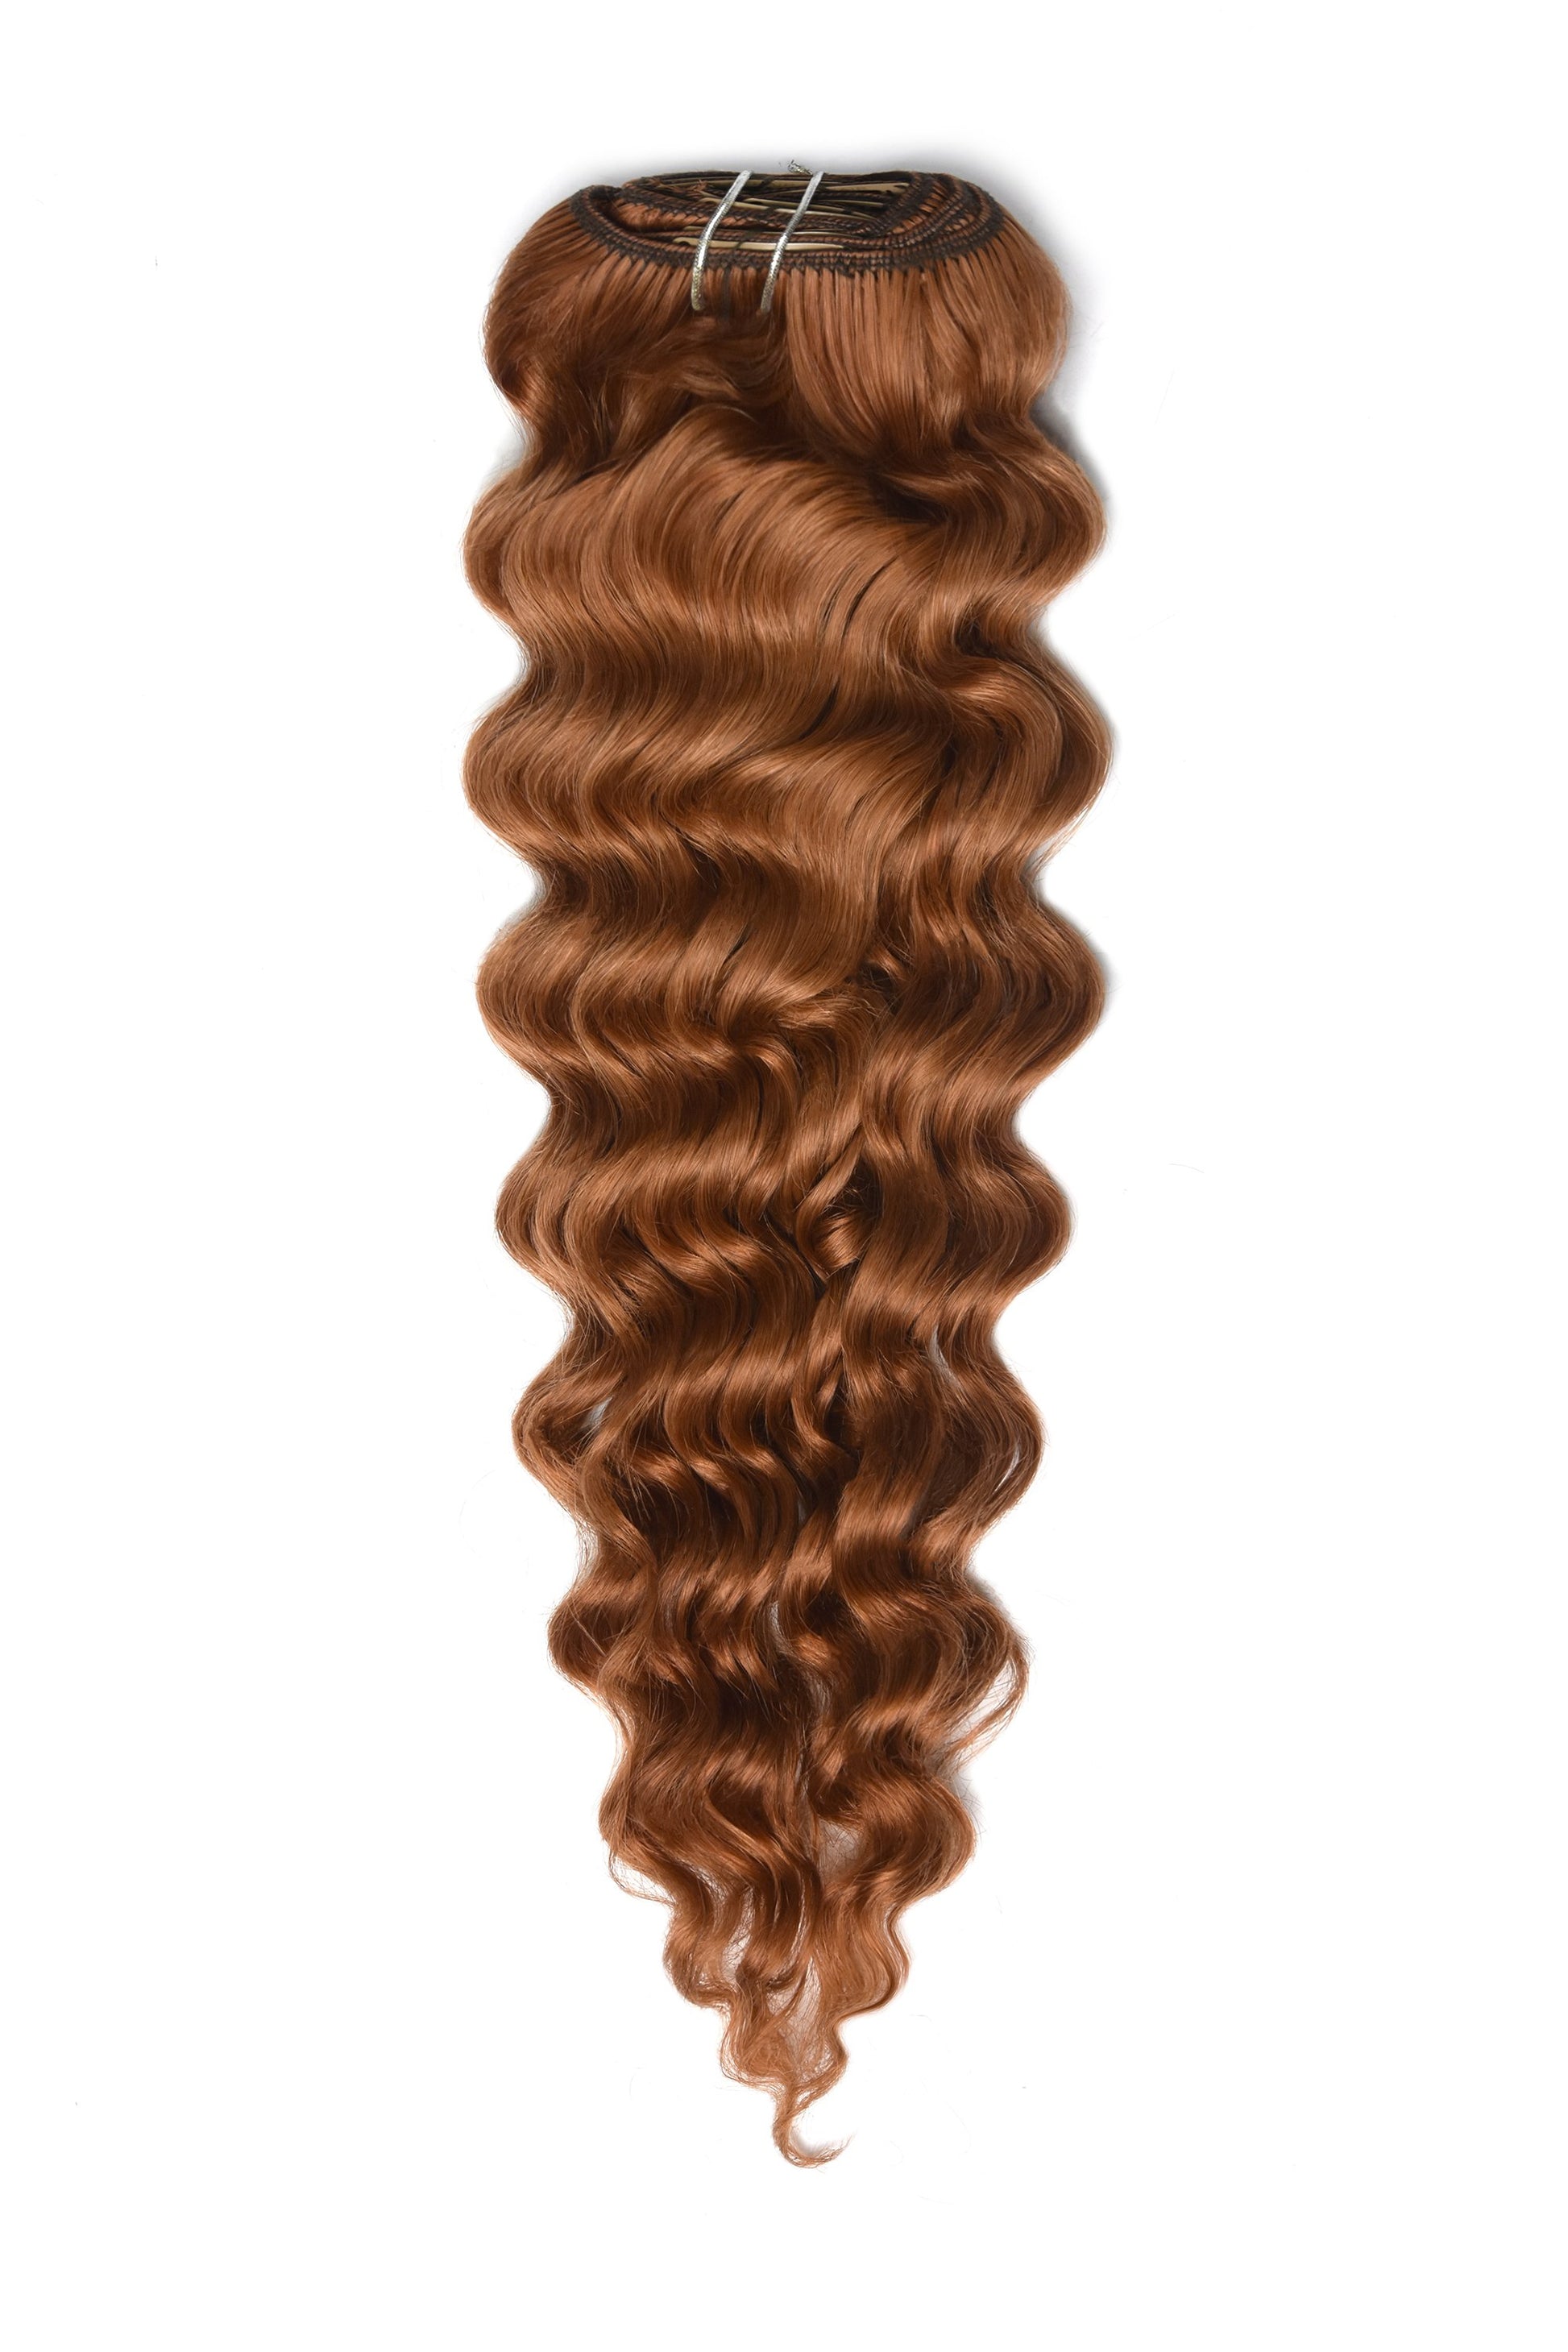 Red curly hair extensions